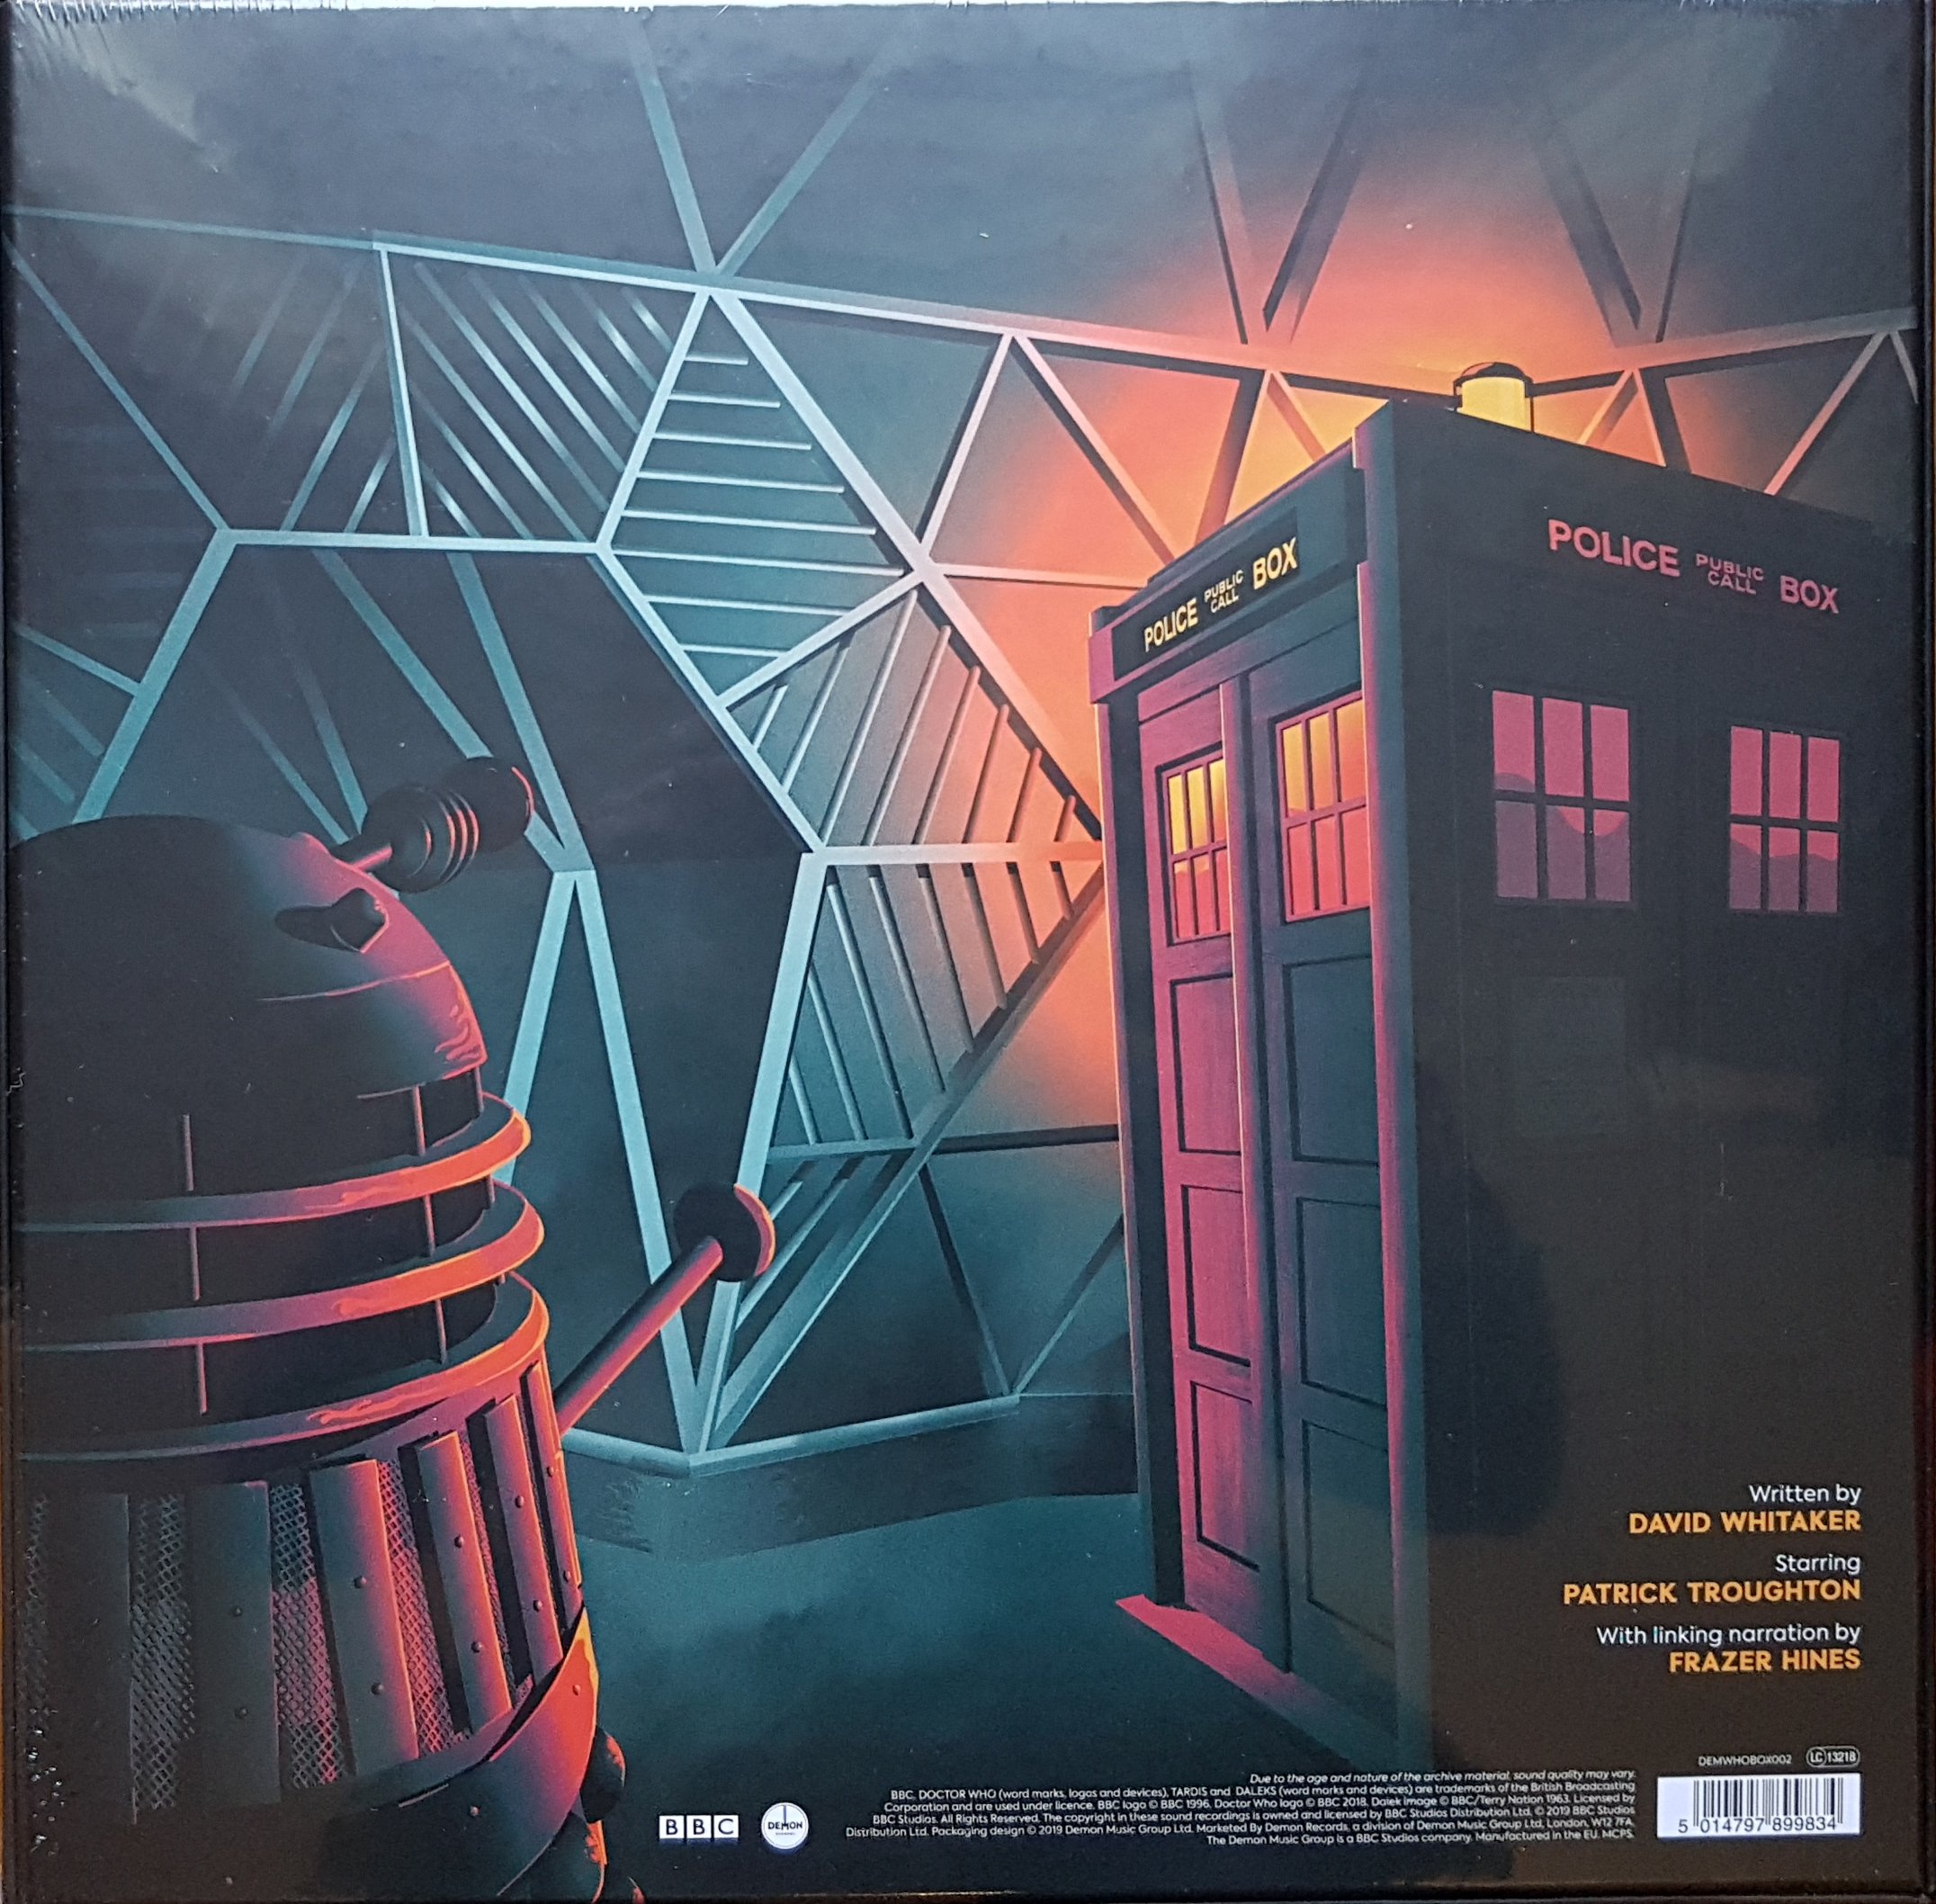 Picture of DEMWHOBOX002X Doctor Who - The evil of the Daleks by artist David Whitaker from the BBC records and Tapes library